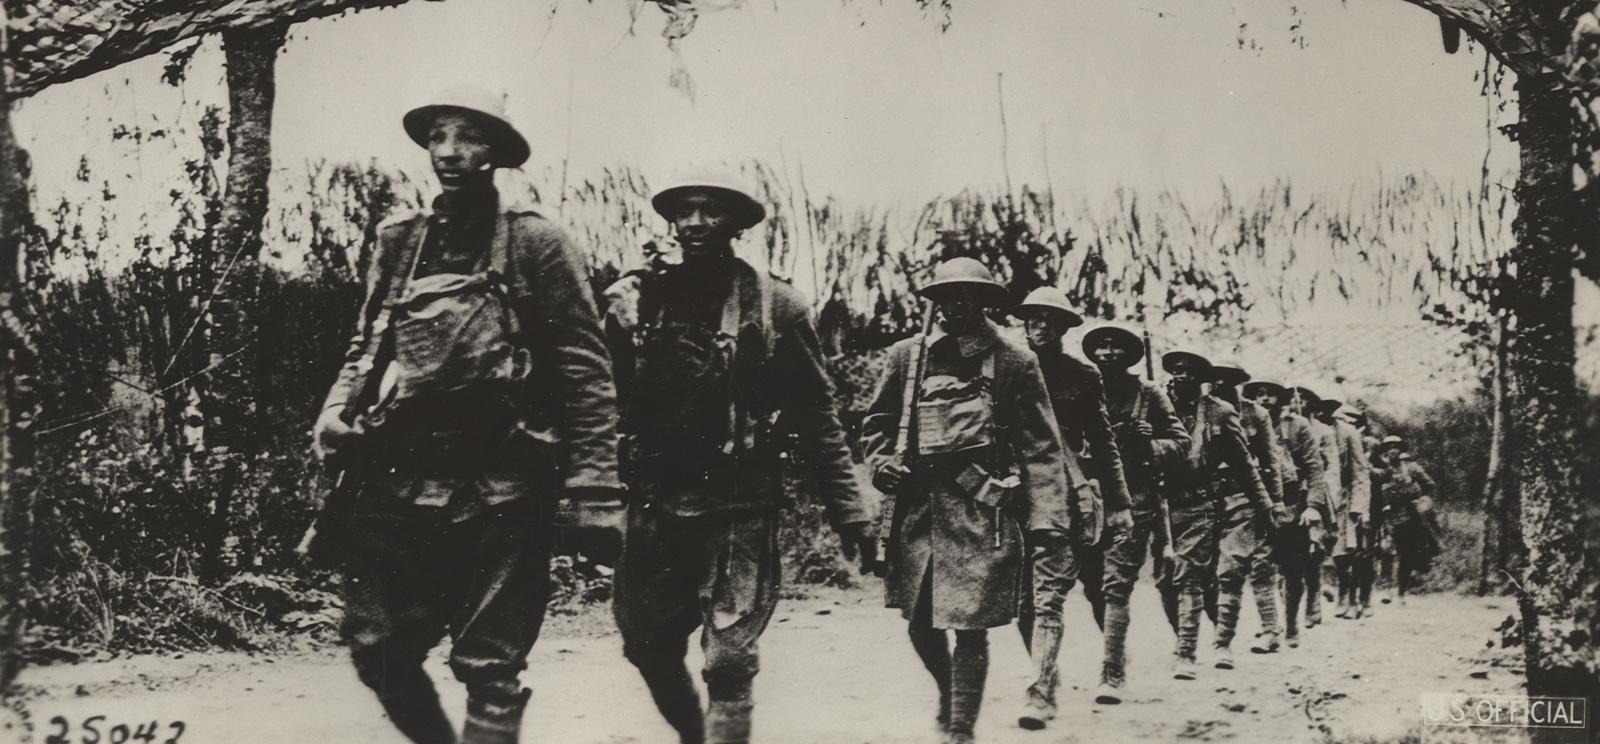 Black and white photograph of a line of Black American WWI soldiers walking through the woods